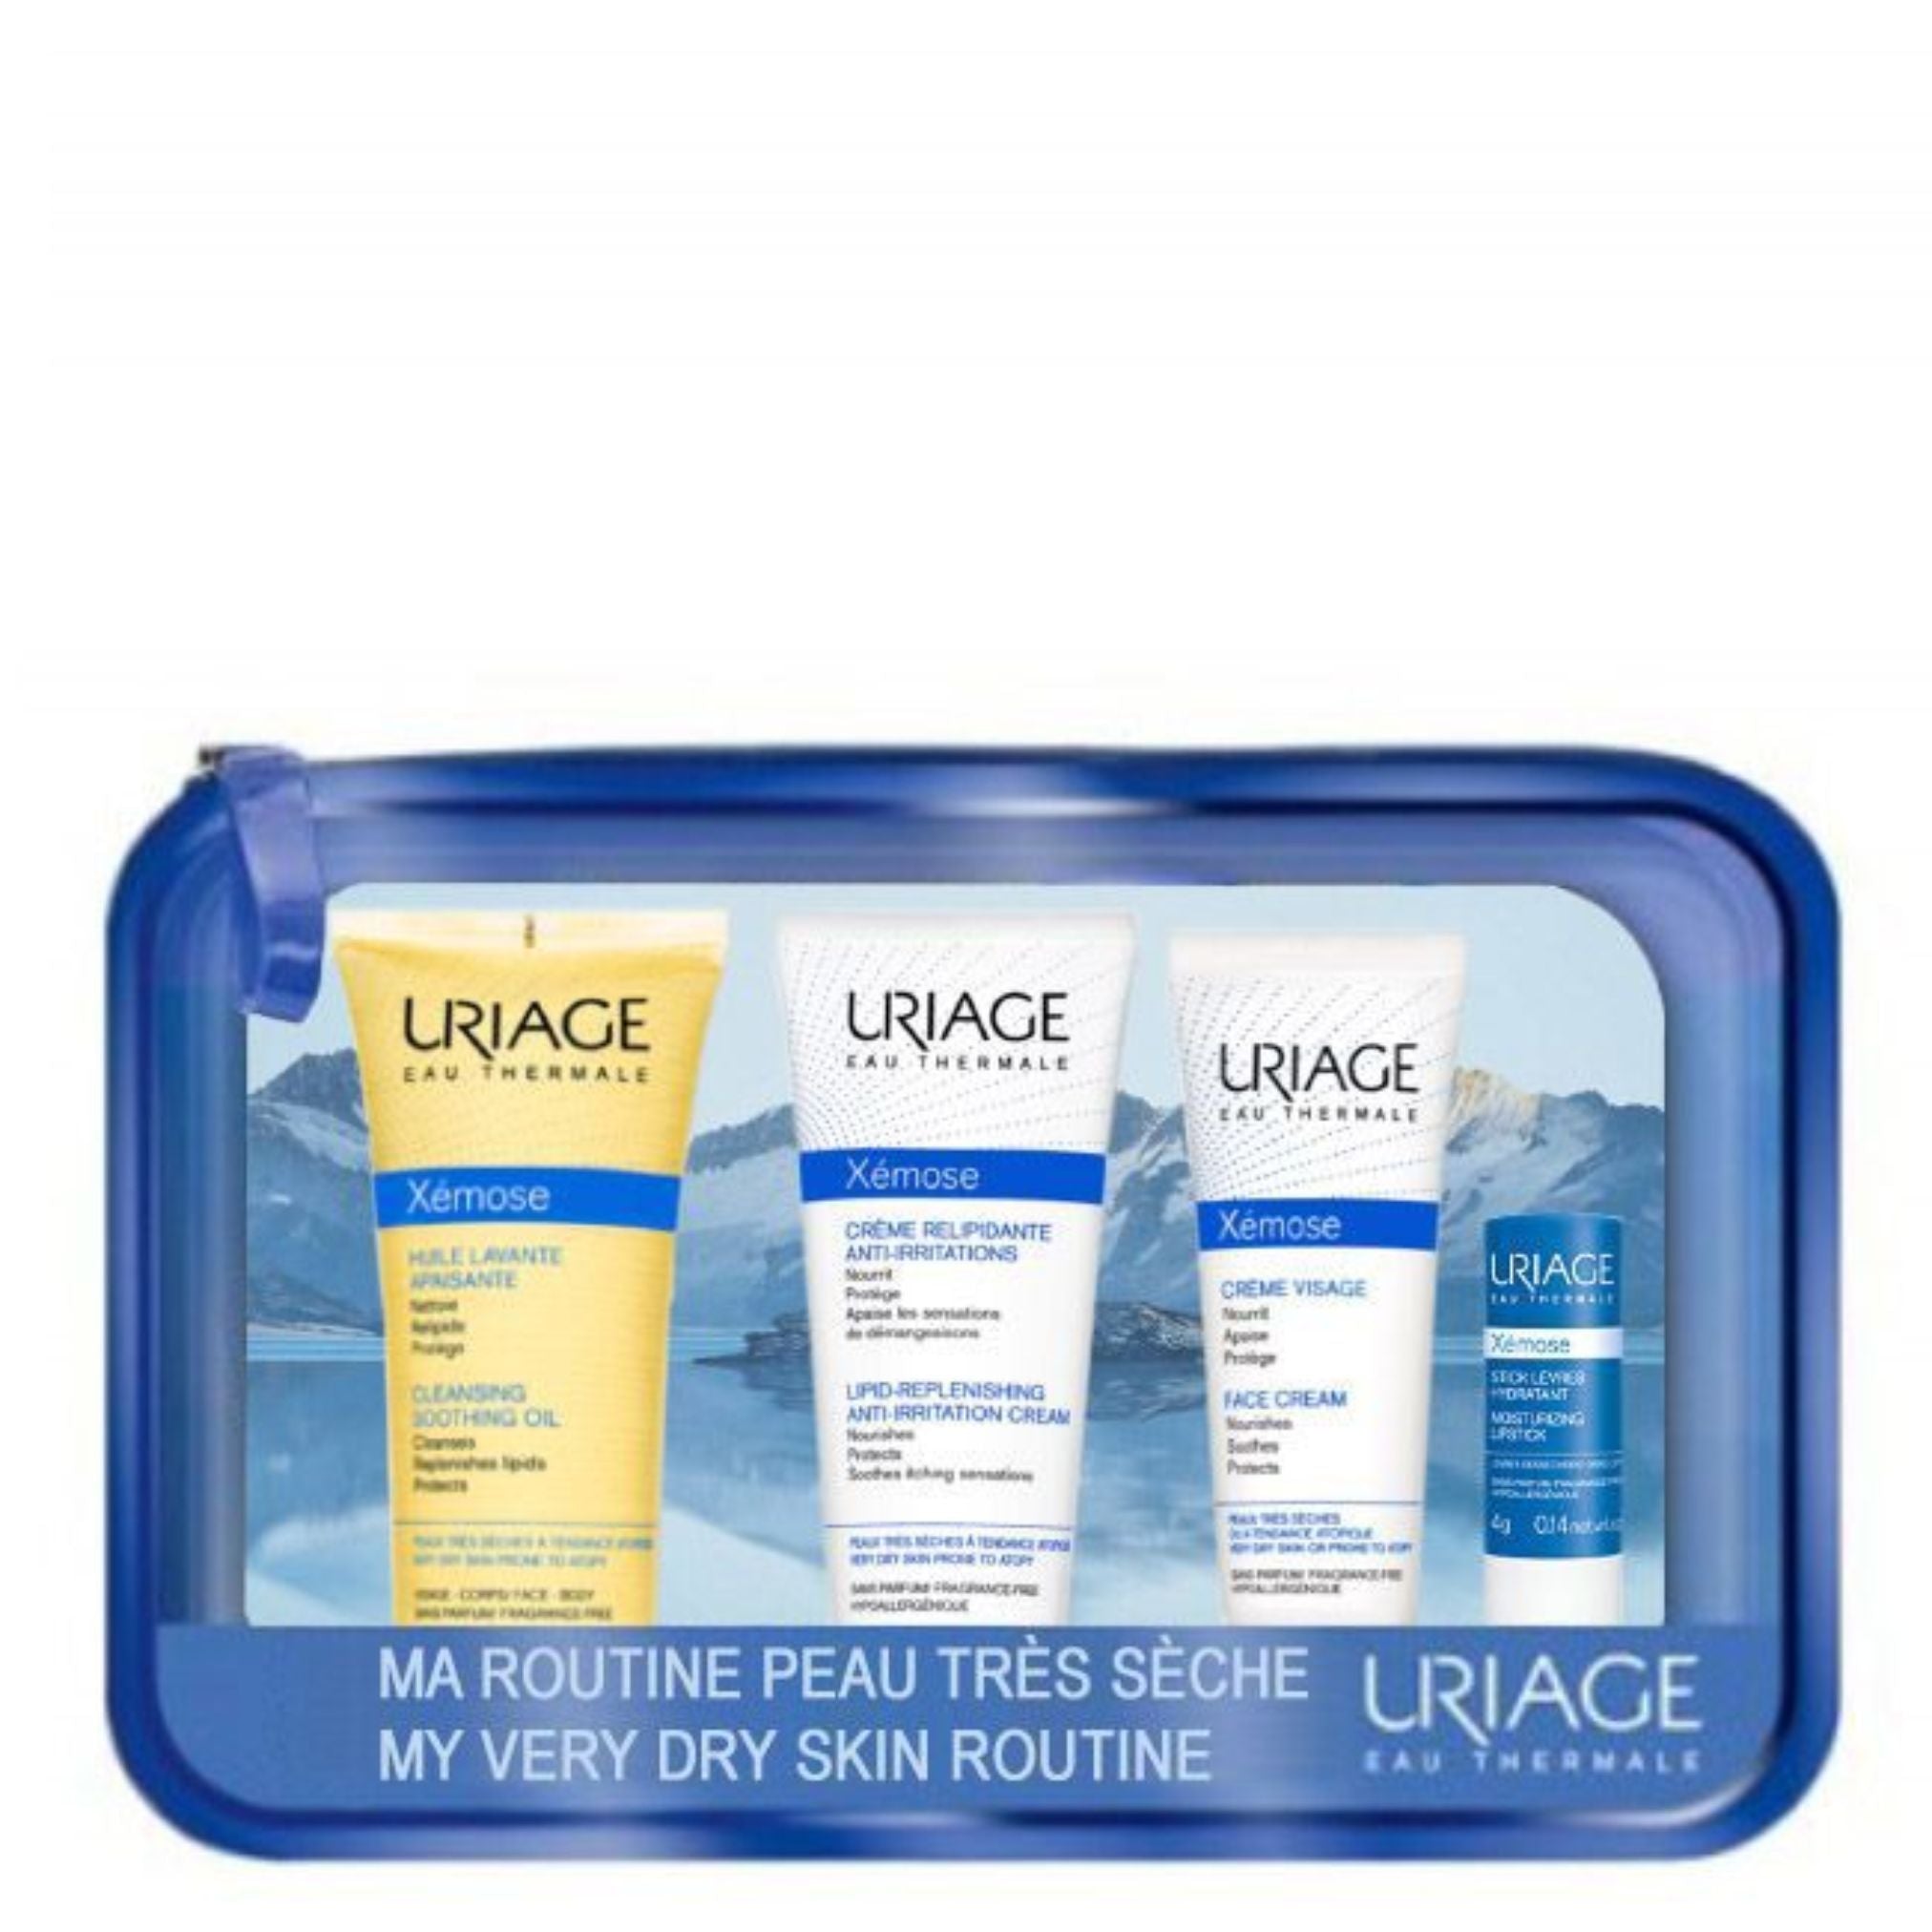 Uriage Promo Pack: Uriage Xémose Protection & Nutrition